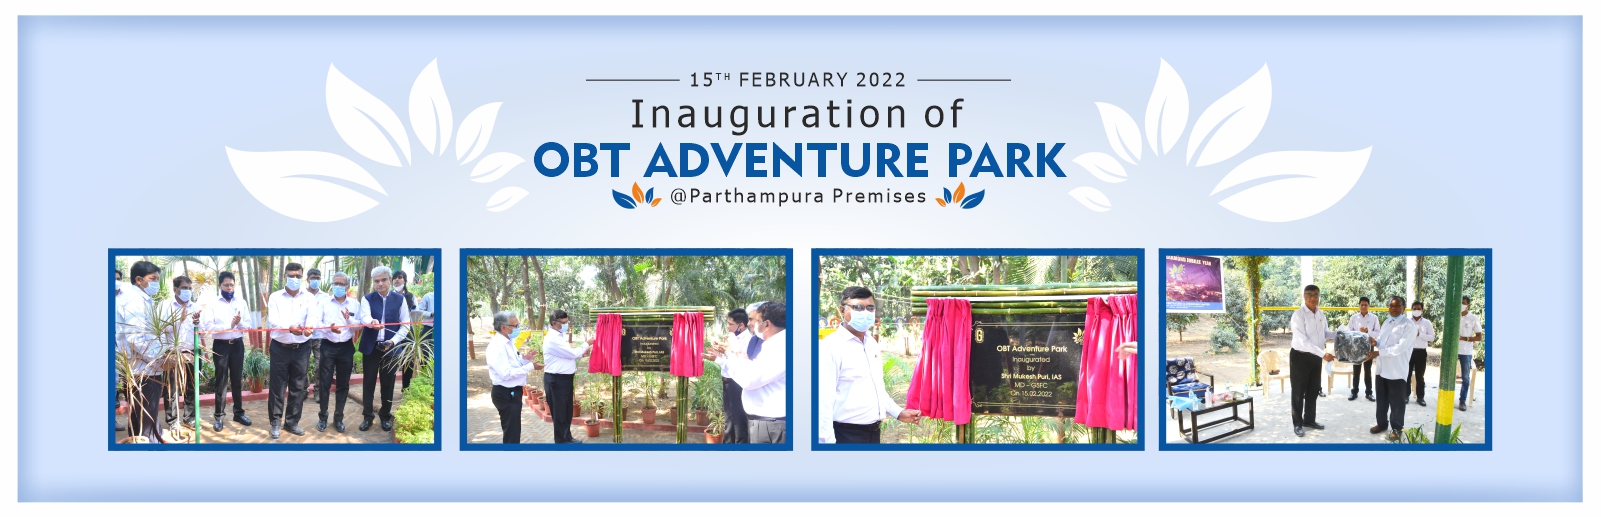 Inauguration of OBT Adventure Park